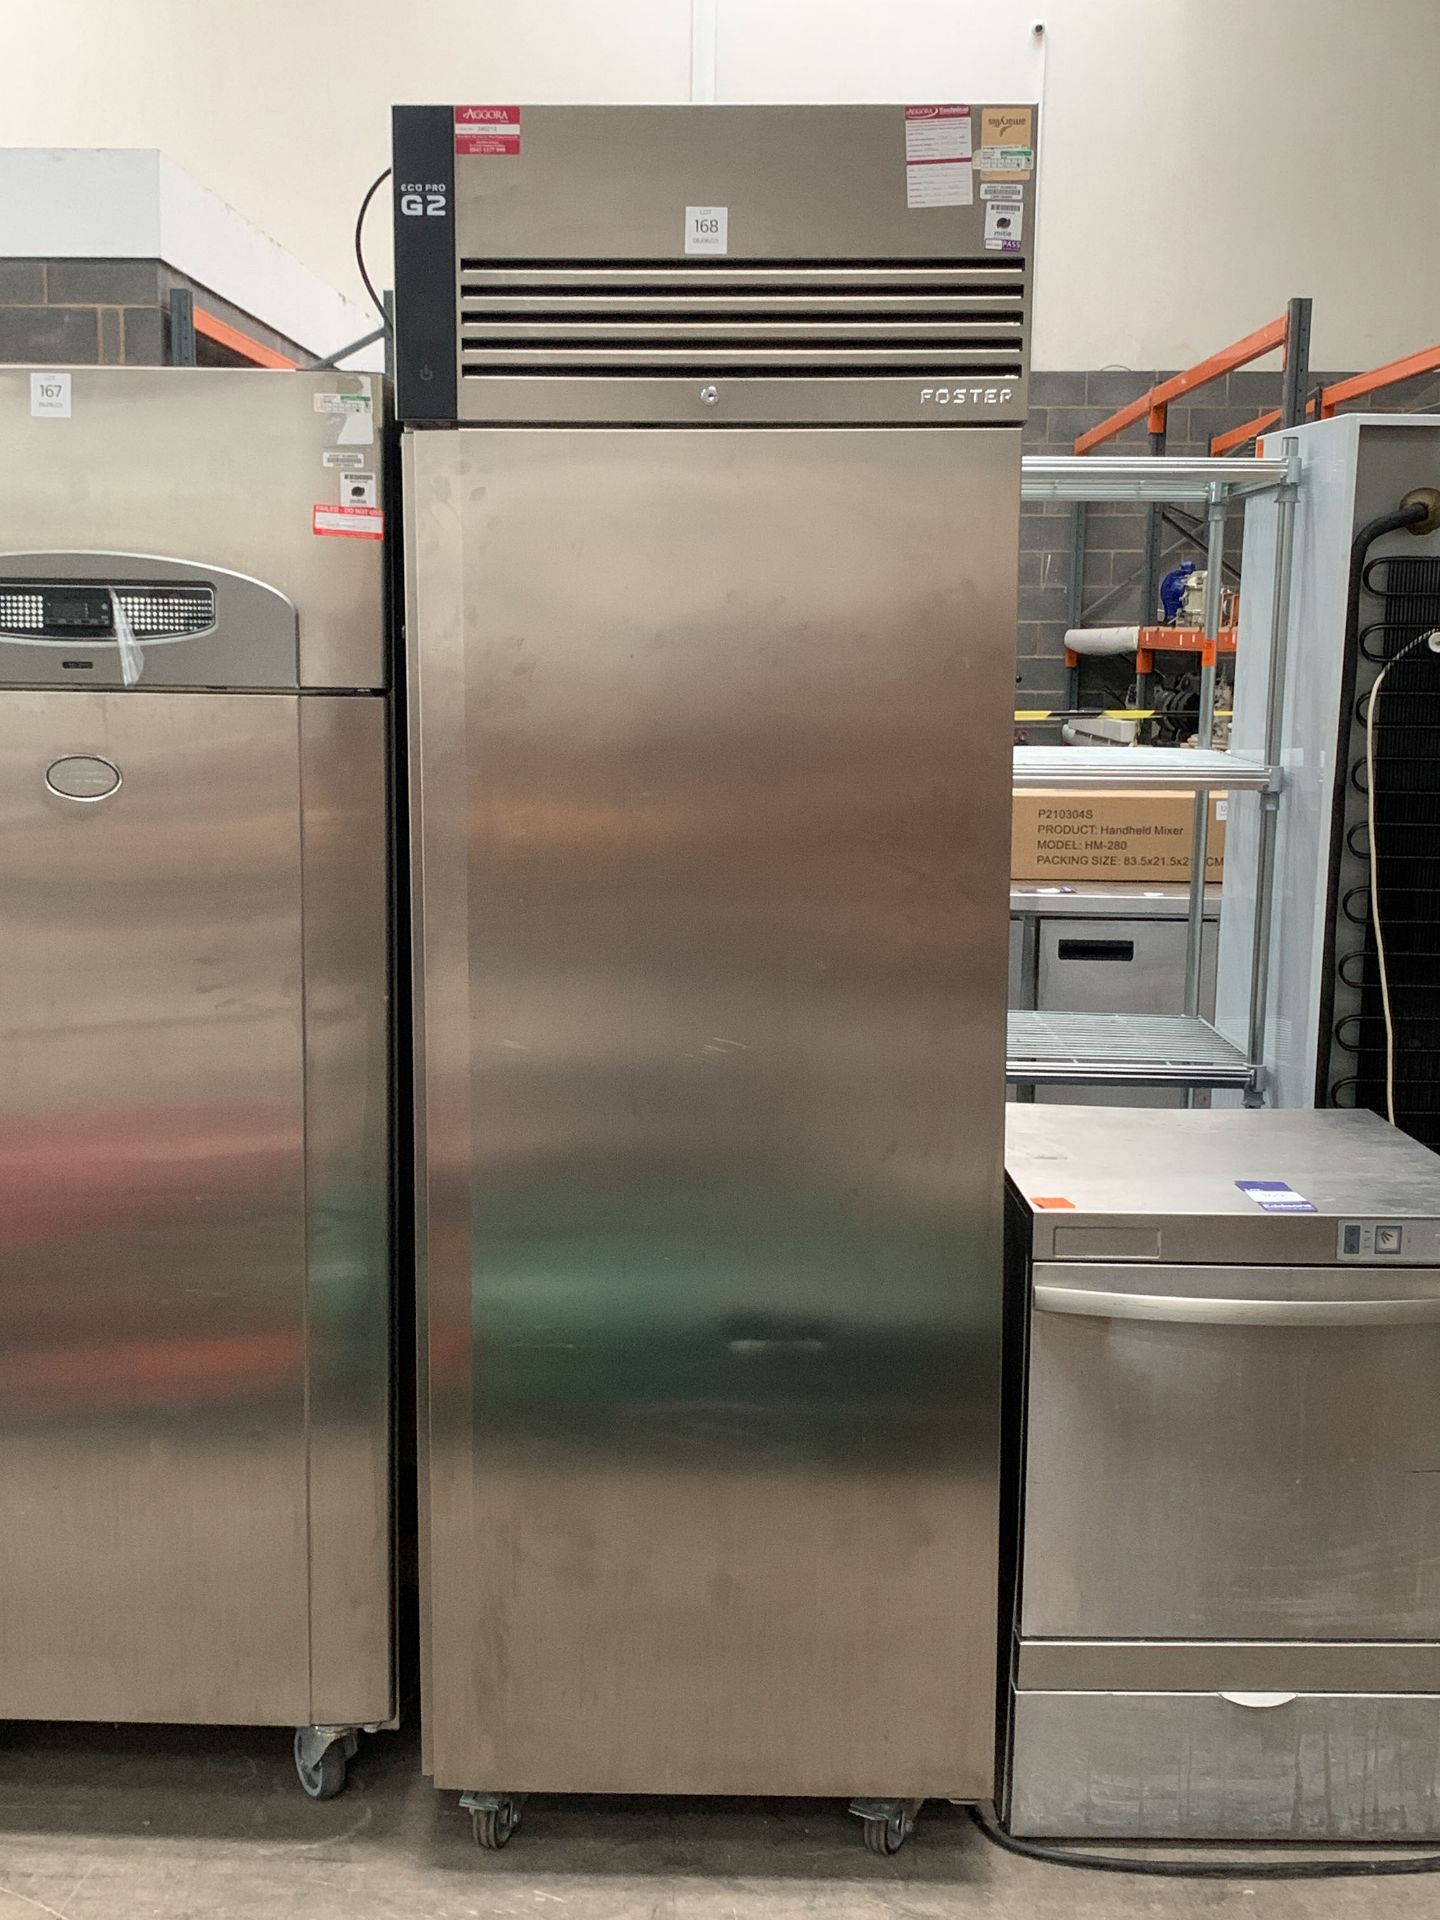 Foster Refrigeration Eco Pro 2 Stainless Steel Commercial Catering Upright Mobile Freezer - Model EP